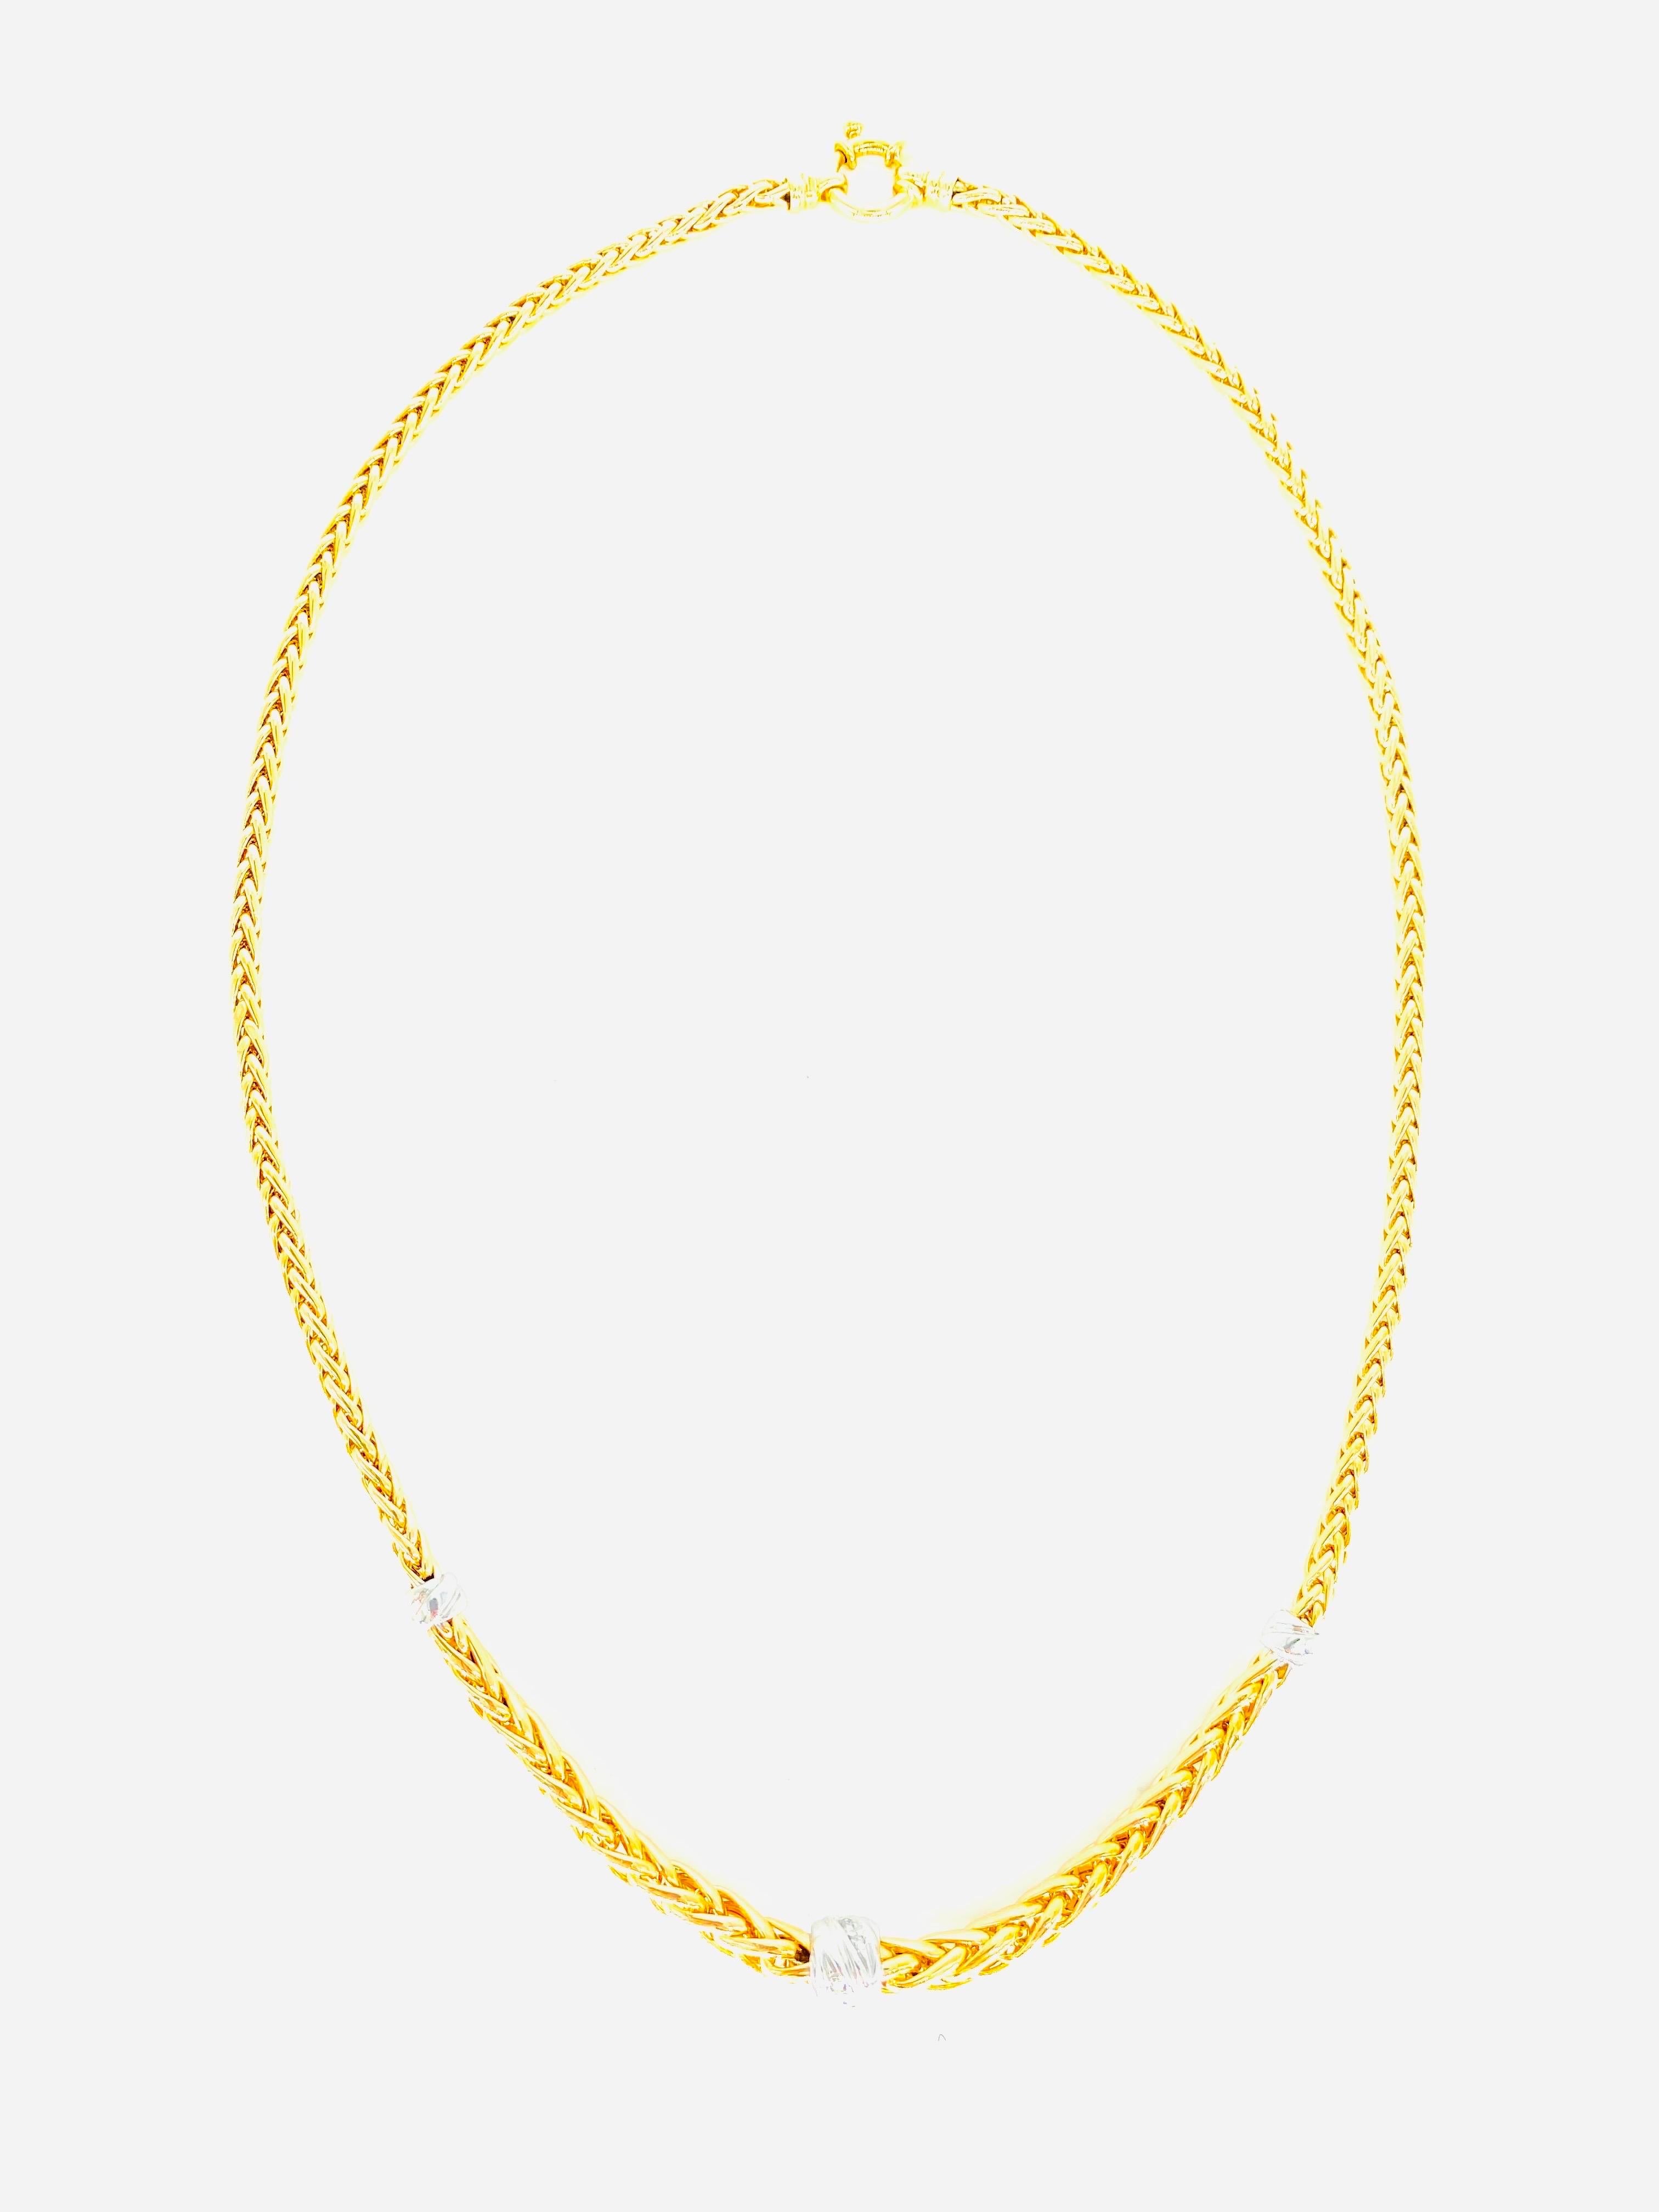 Vintage 0.10 Carat Total Diamonds Two-Tone Graduating Twisted Cable Necklace 14k
Very elegant necklace for any occasions features 9 diamonds totaling 0.10 carat in weight. The necklace measures between 3mm graduating to 5mm in width and is 18 inches